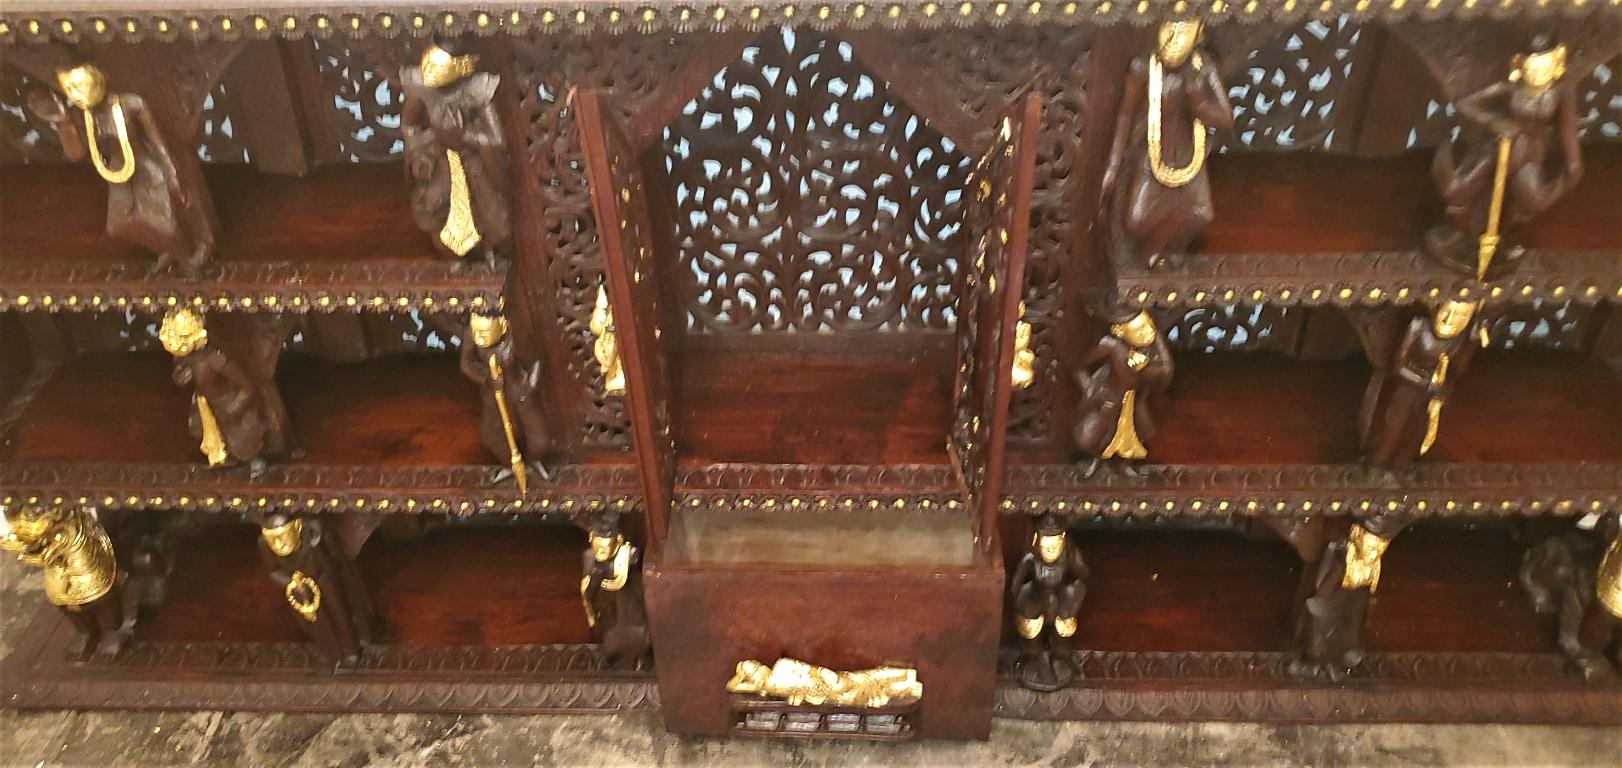 PRESENTING an EXCEPTIONAL AND RARE 19C SE Asian Highly Carved Wooden and Gilded Floor or Wall Case or cabinet featuring Hindu Gods.

OUTSTANDING and VERY RARE!

Mid 19th Century, circa 1850 and probably Cambodian, Thai or Burmese, carved rosewood